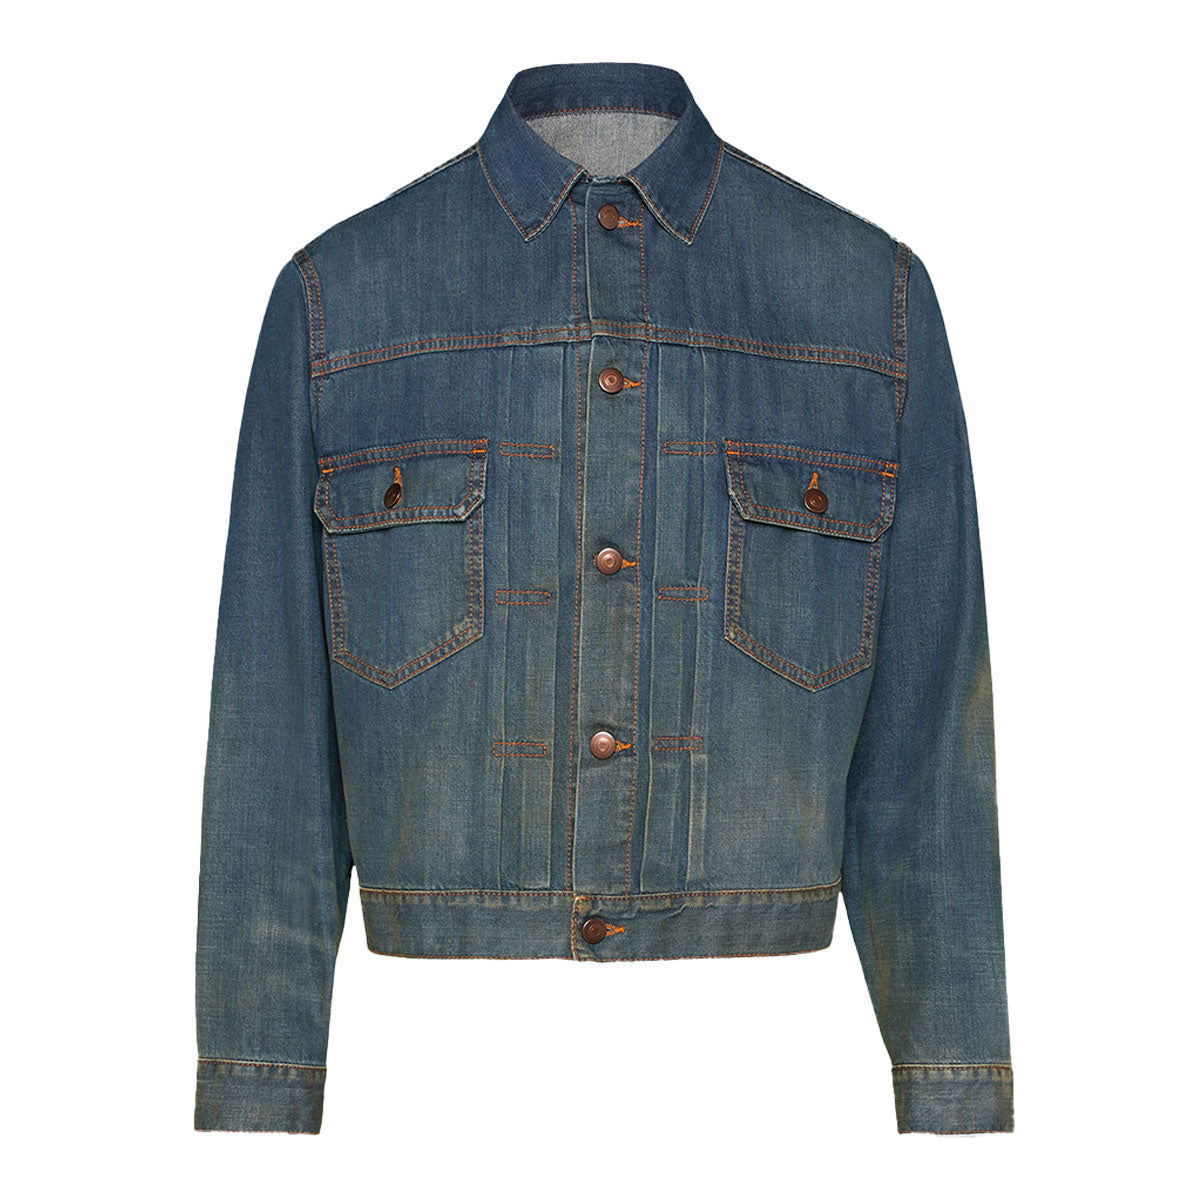 Denim Jacket – Why are you here?